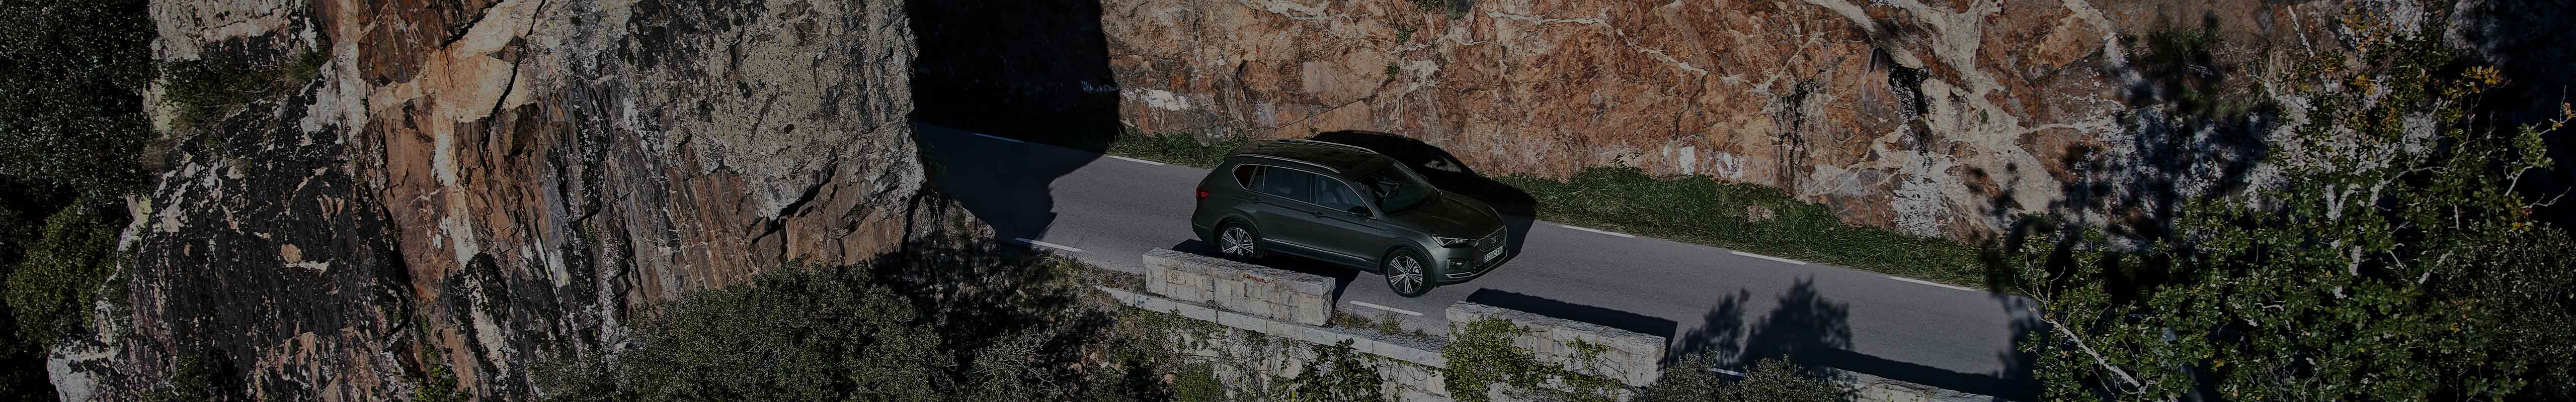 SEAT Tarraco 2021 SUV in dark camouflage colour front side view driving 